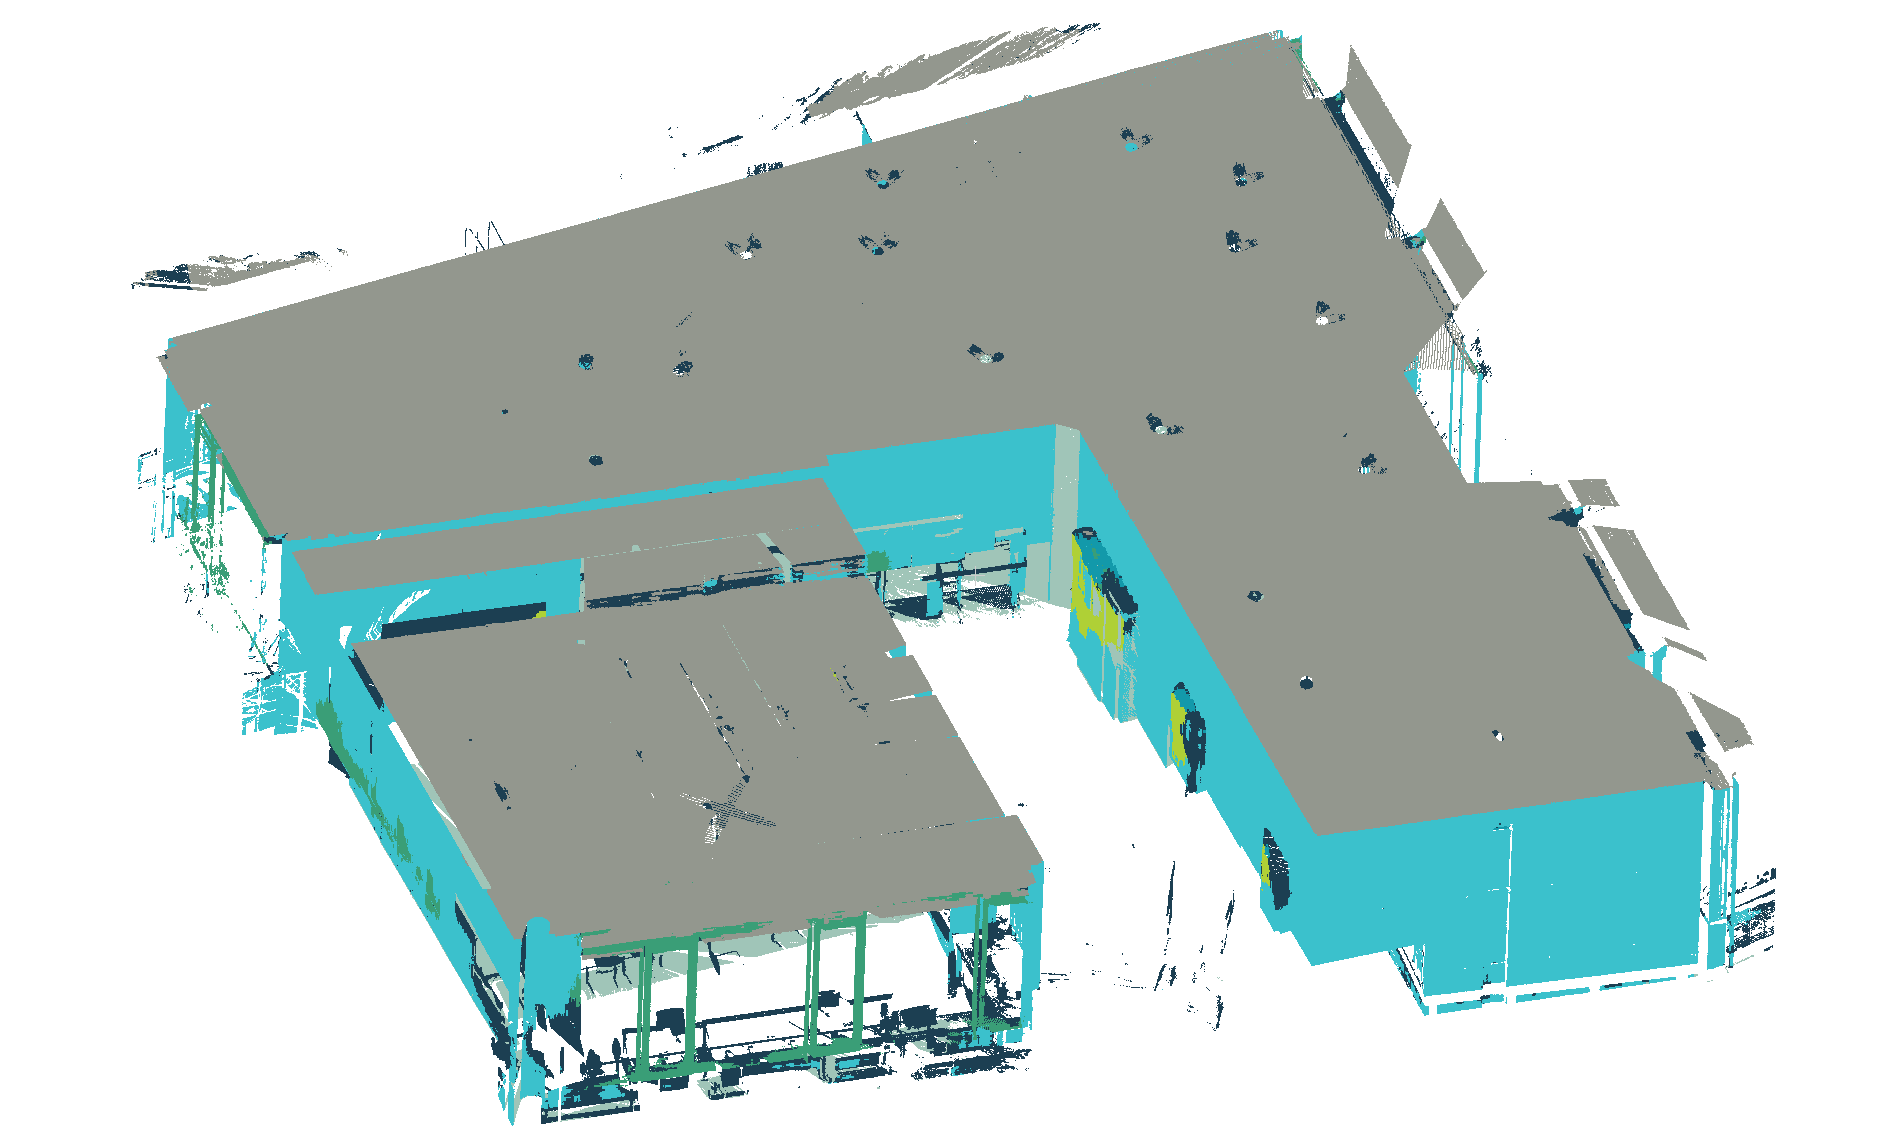 Segmented point cloud of an interior space